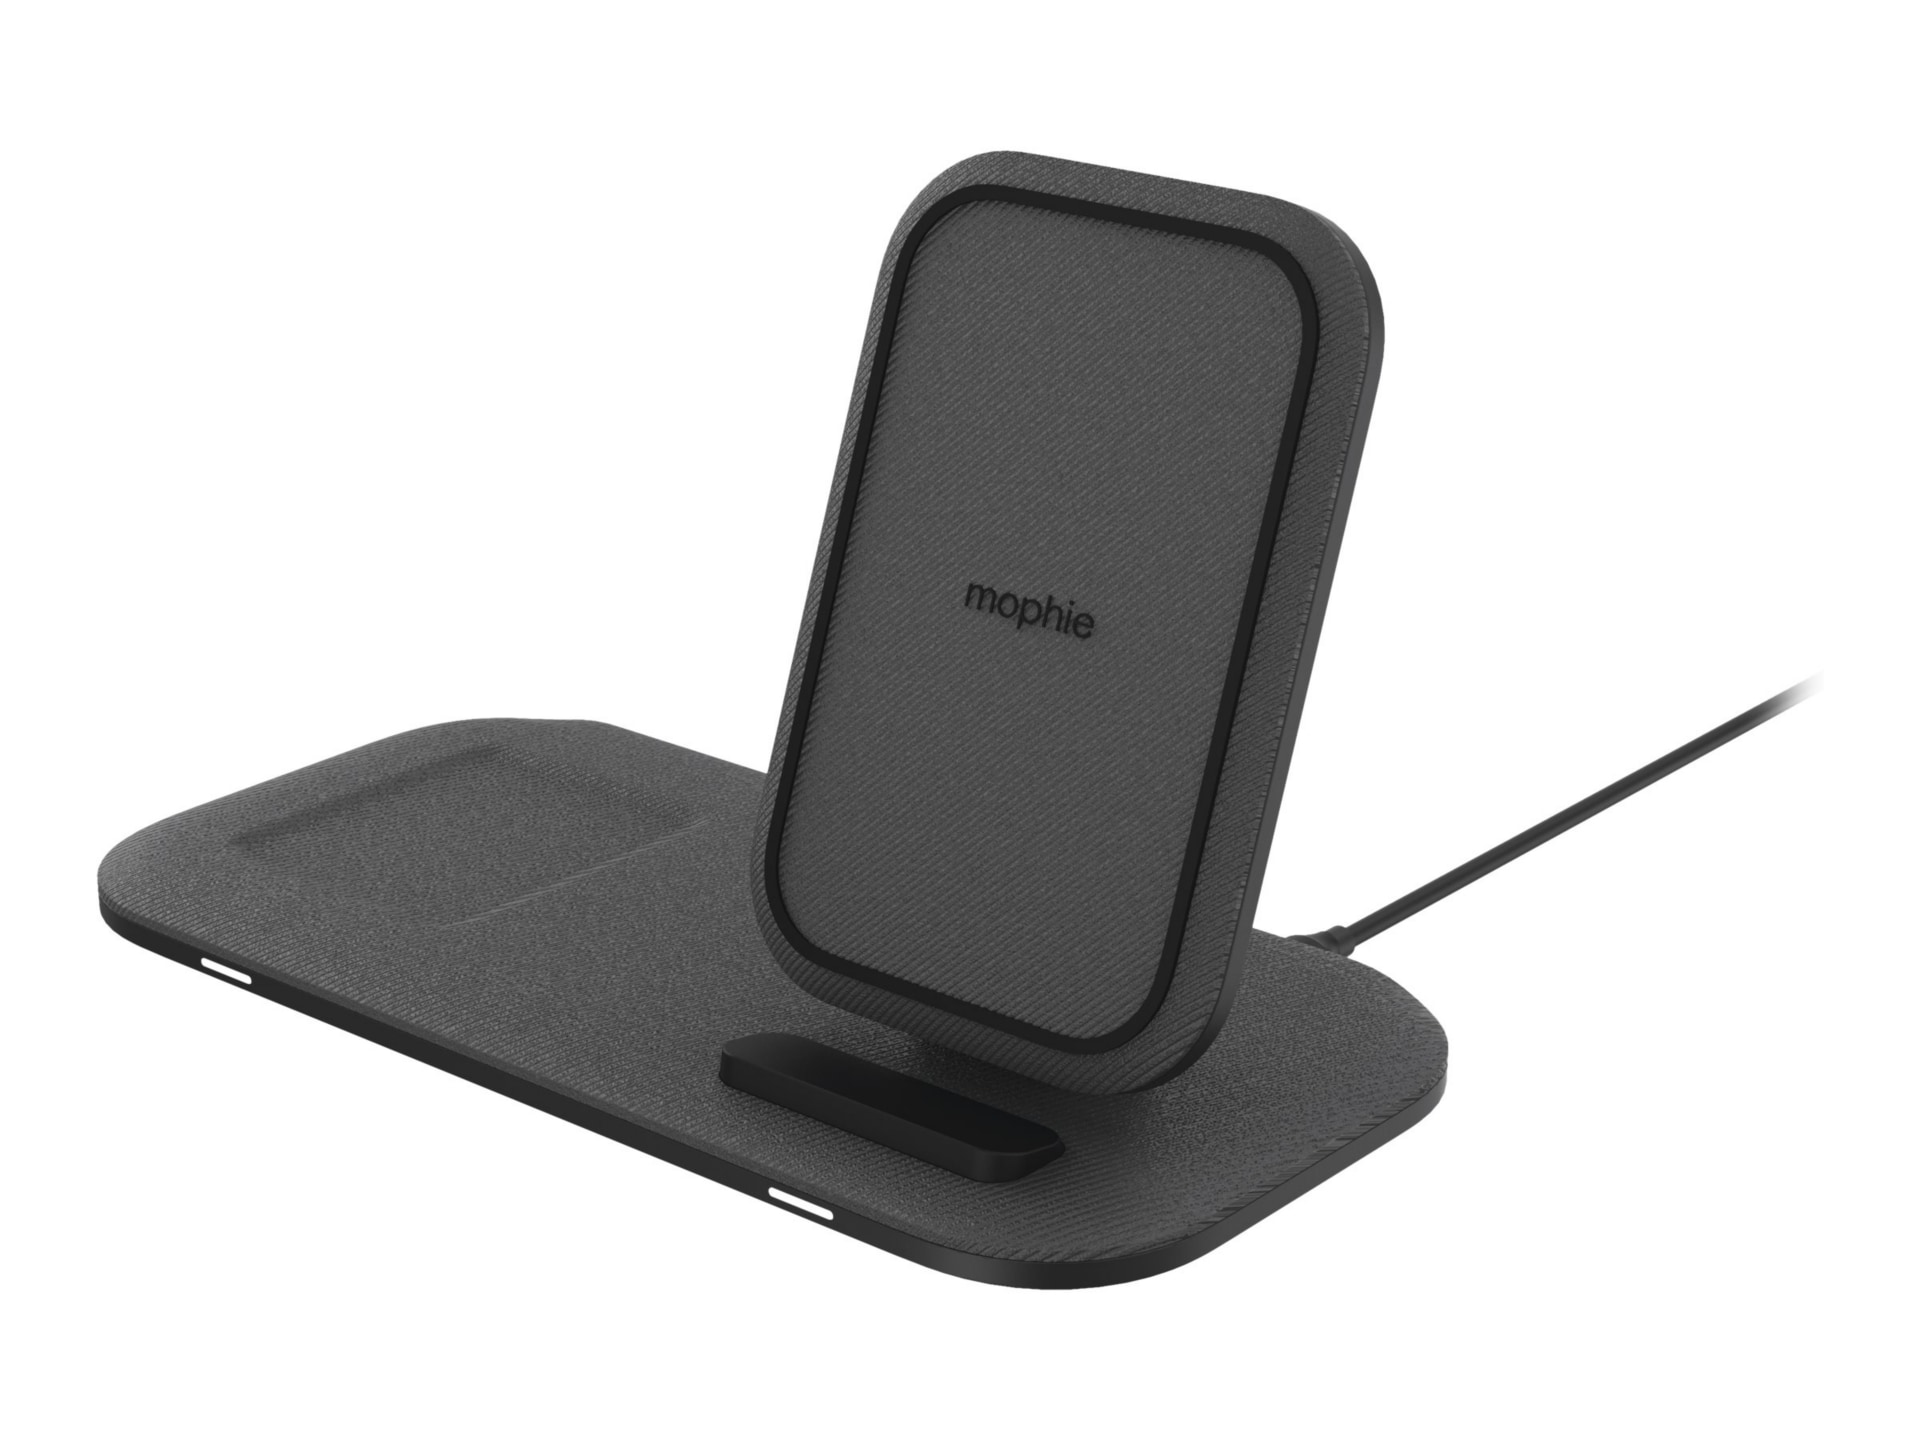 mophie wireless charging stand+ with USB-A port for Qi-enabled Devices